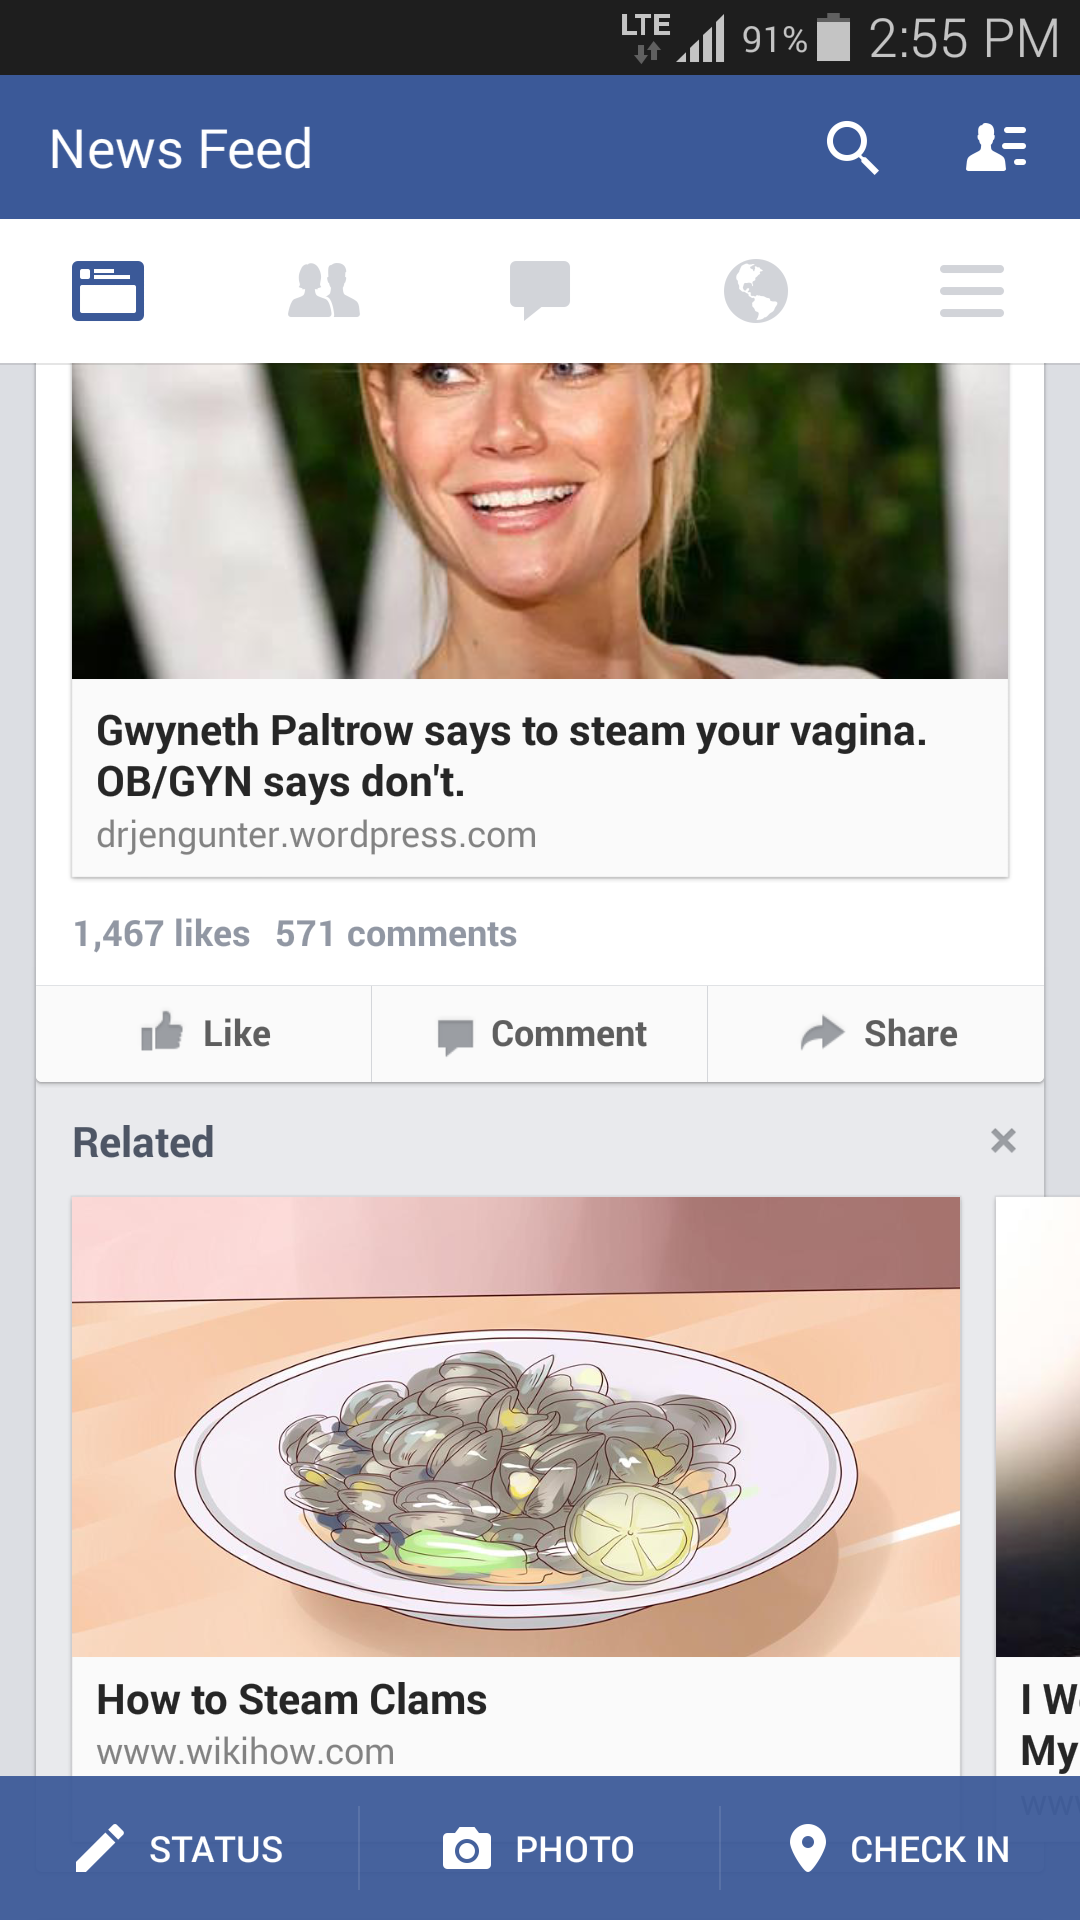 Facebook was a little on the nose with their 'related topic' to this story.